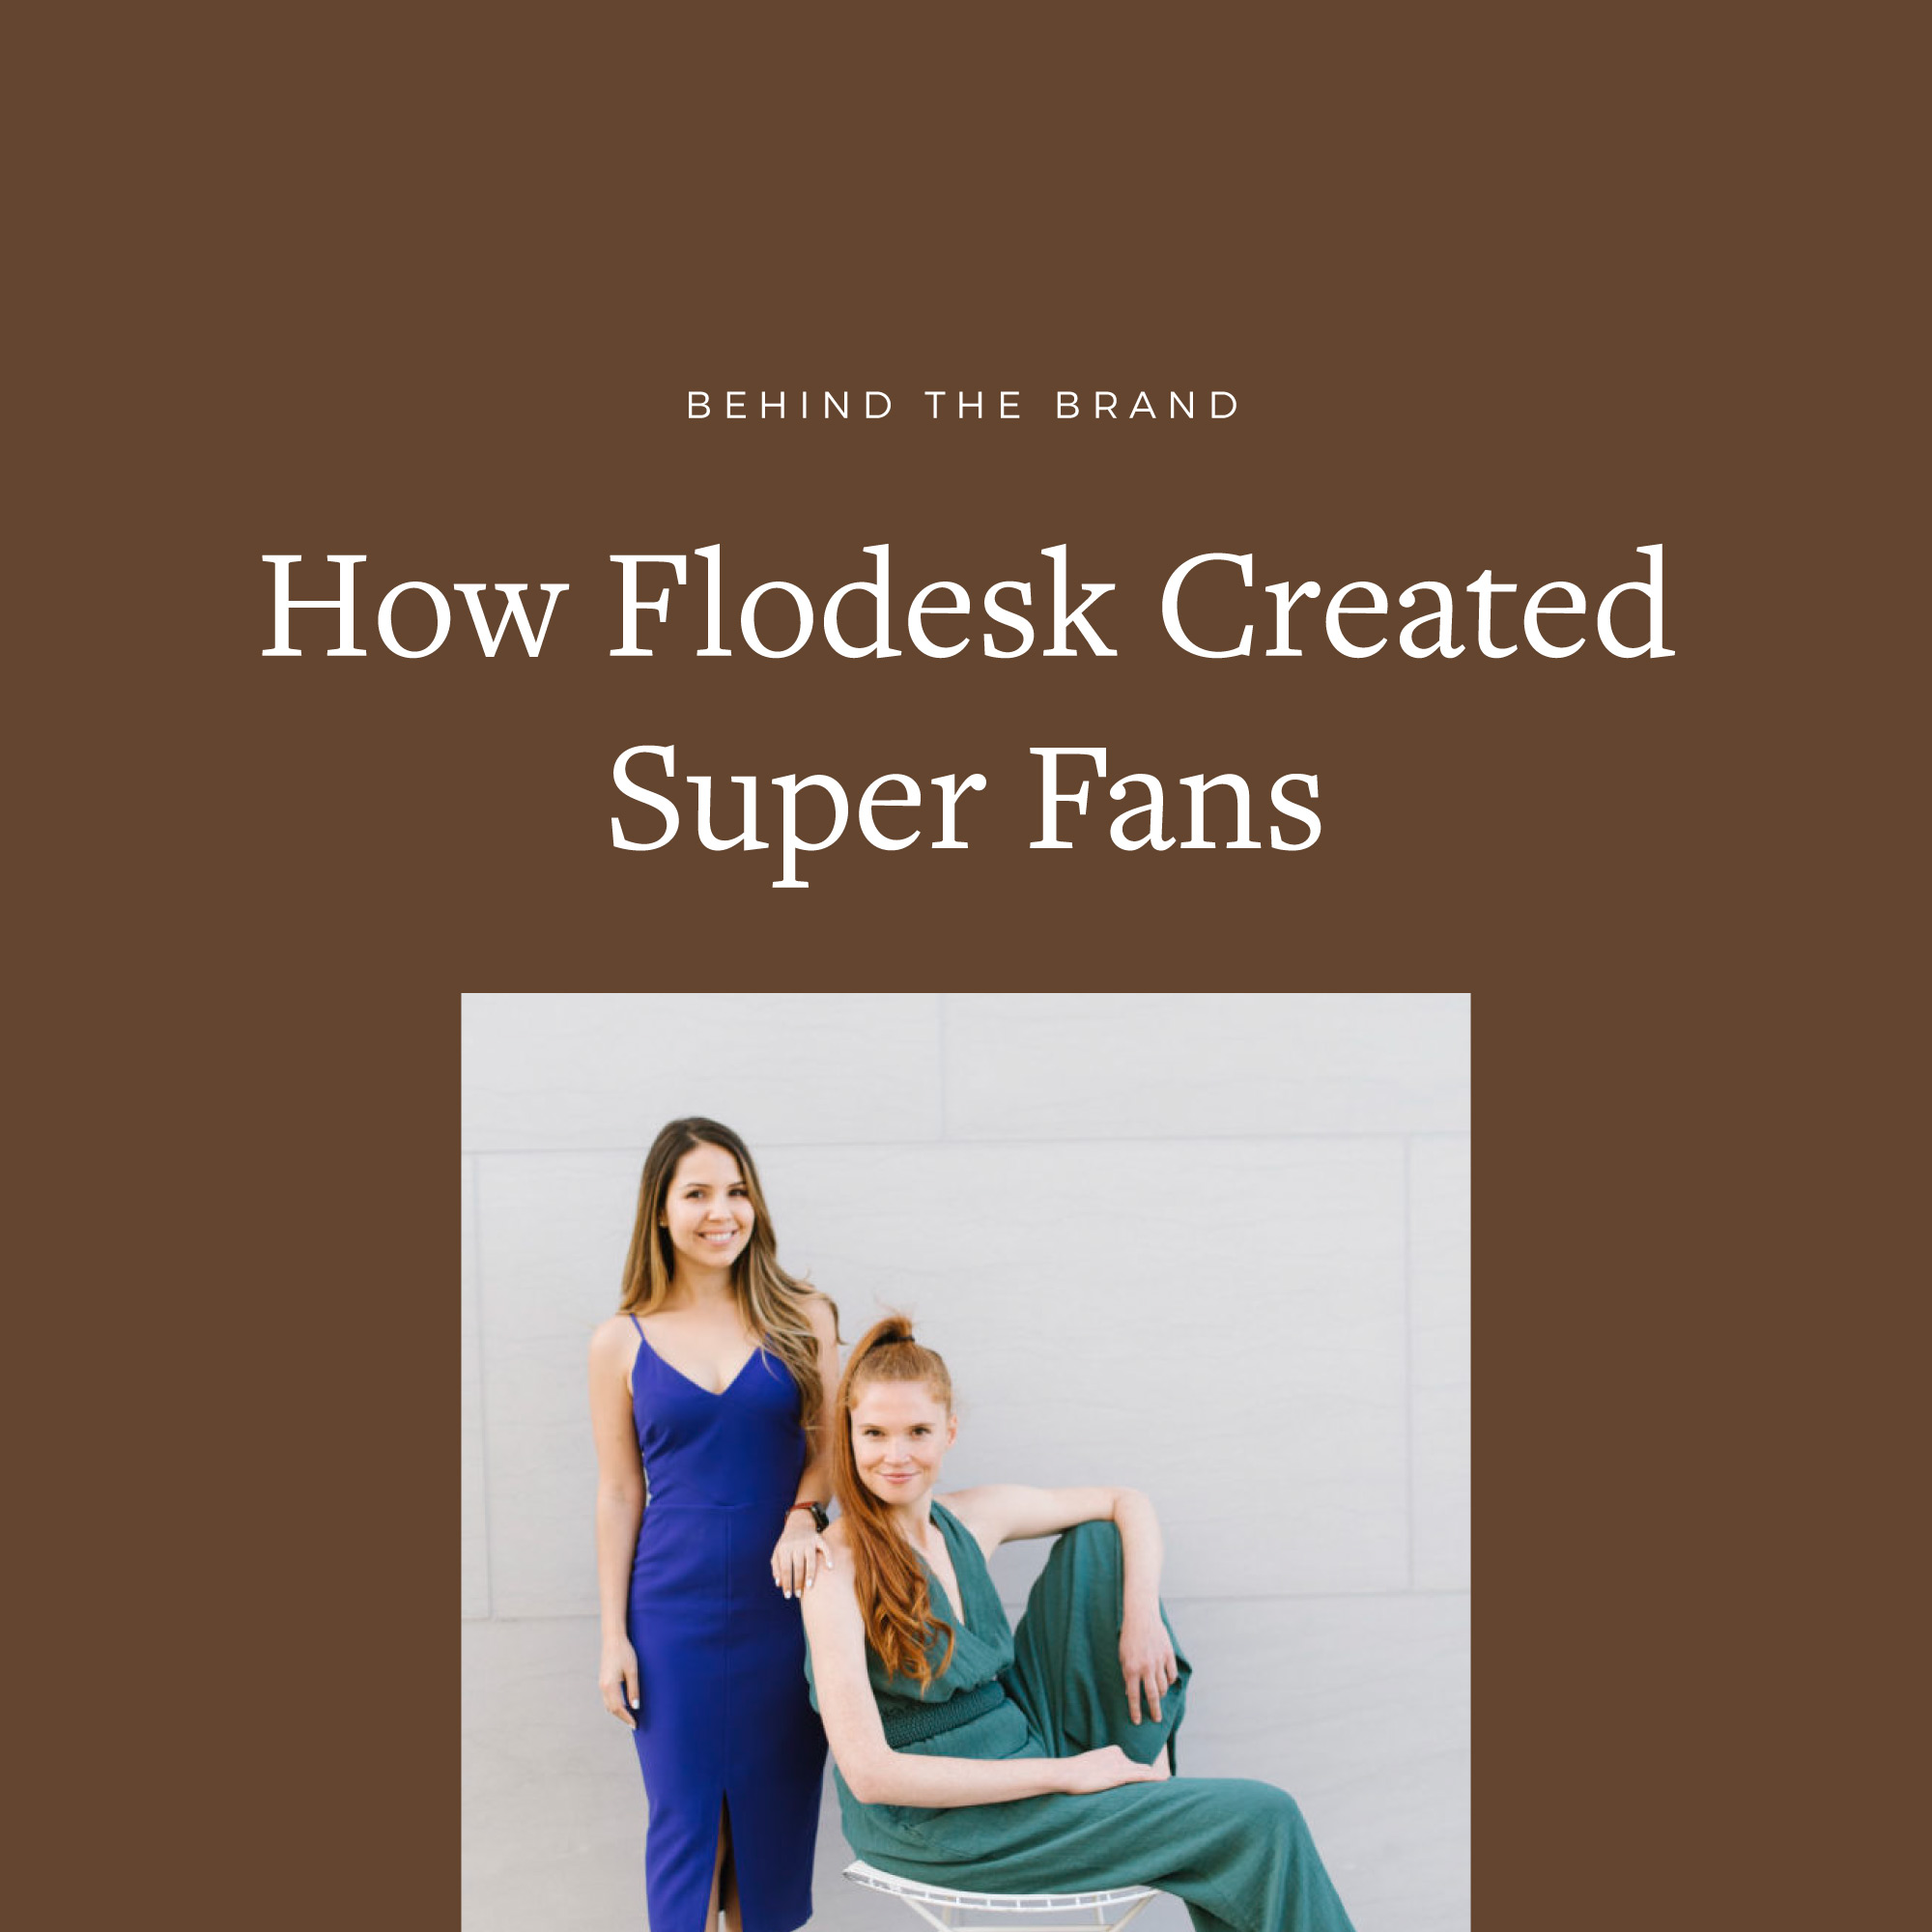 Flodesk is a revolutionary email marketing platform. We're diving into why Flodesk has been successful in creating super fans.